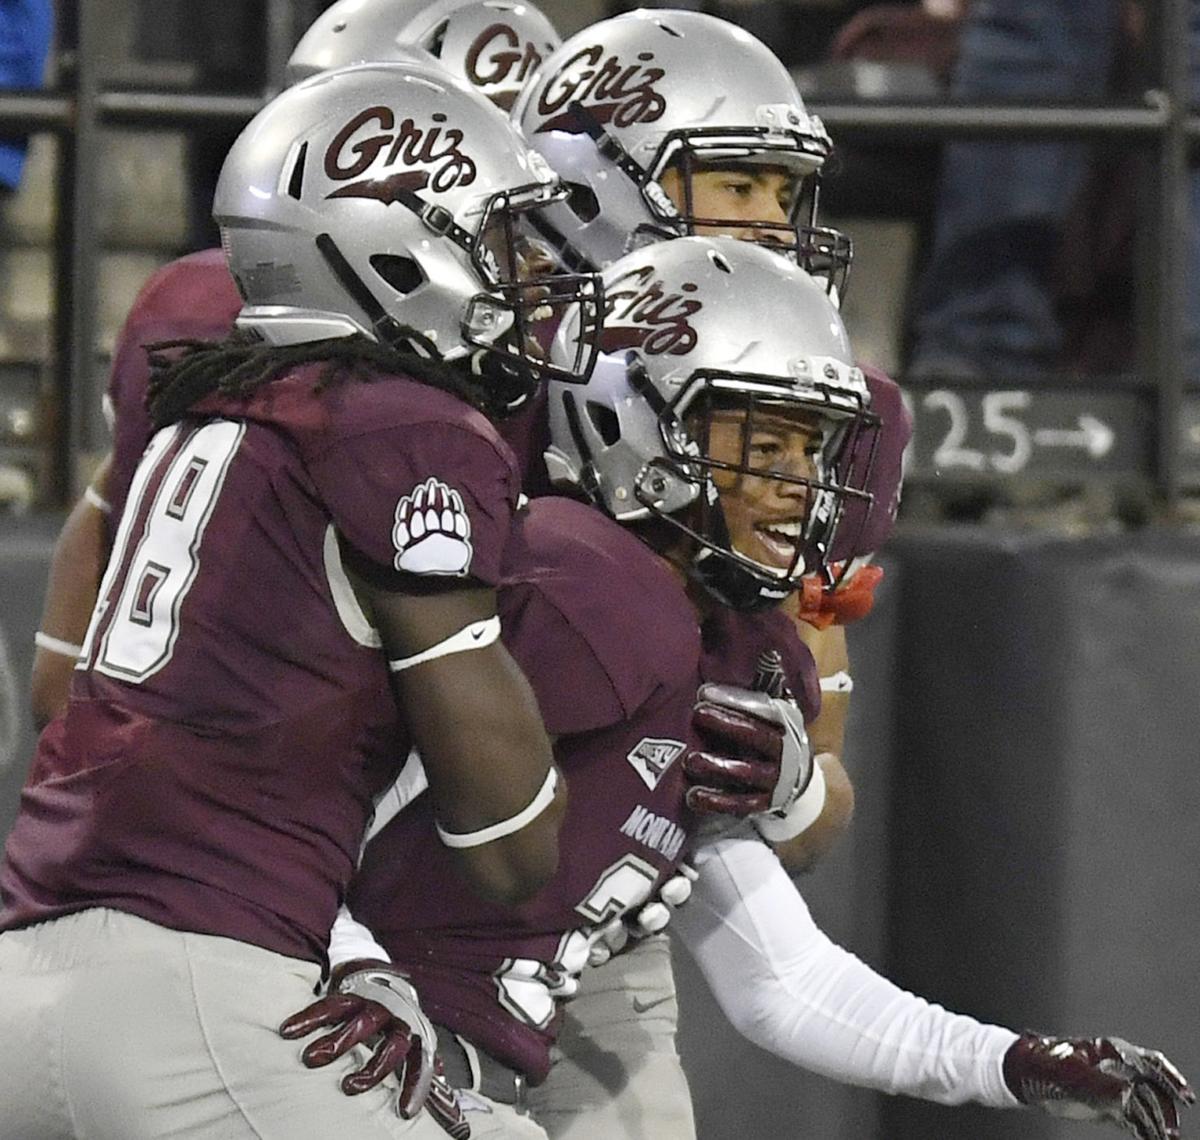 Montana football schedules released for 2018, 2019 | University of Montana Sports | missoulian.com